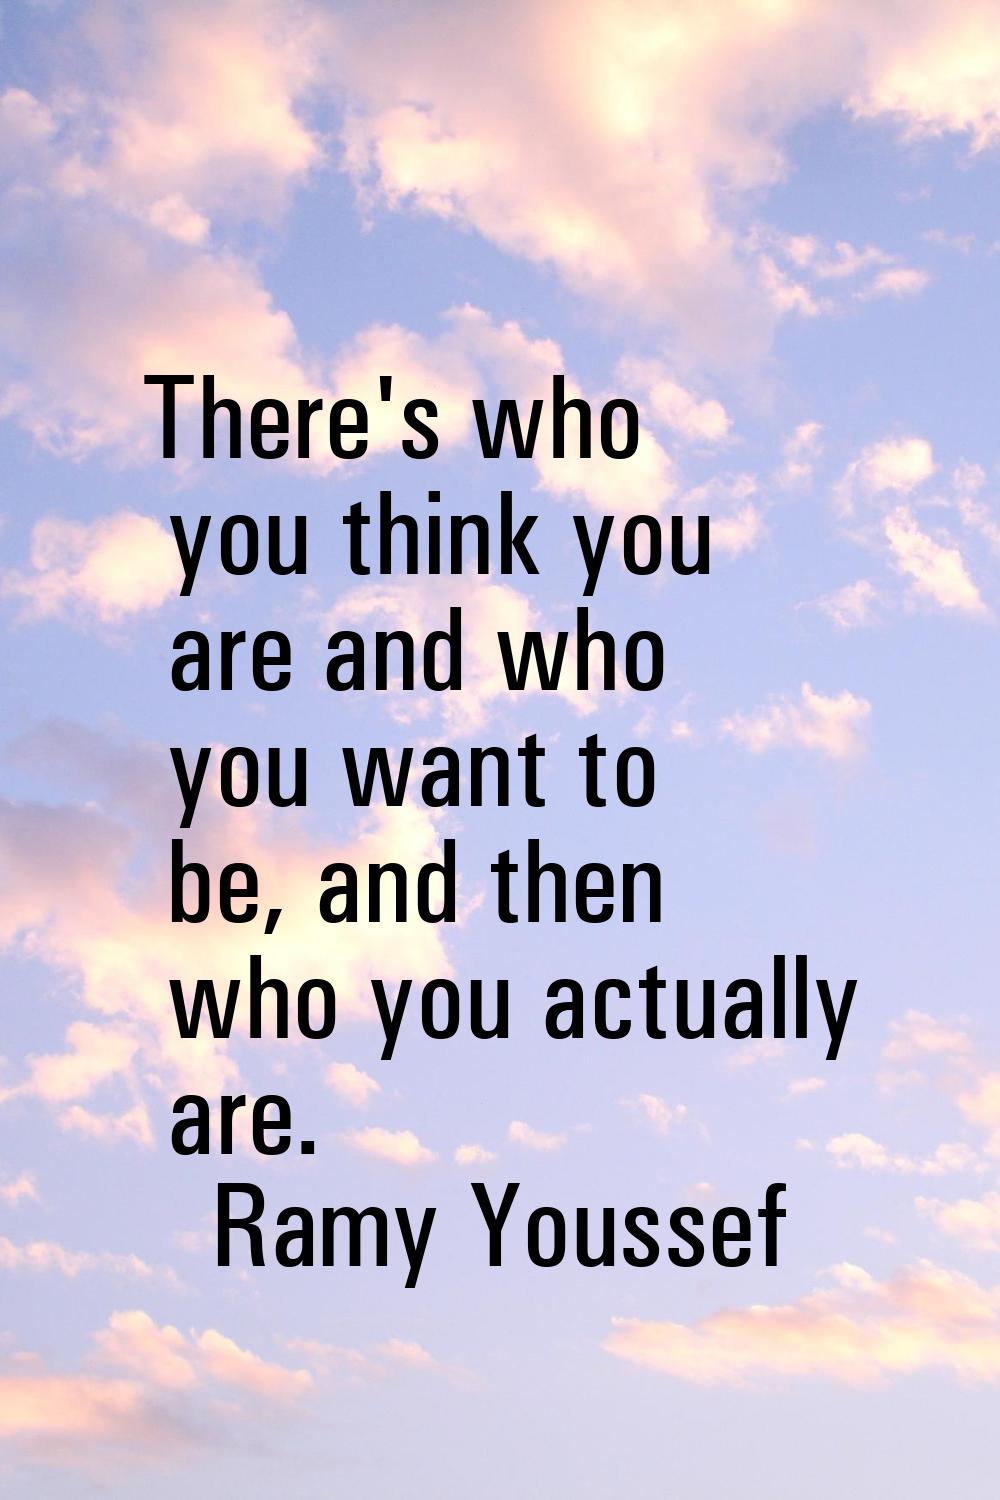 There's who you think you are and who you want to be, and then who you actually are.